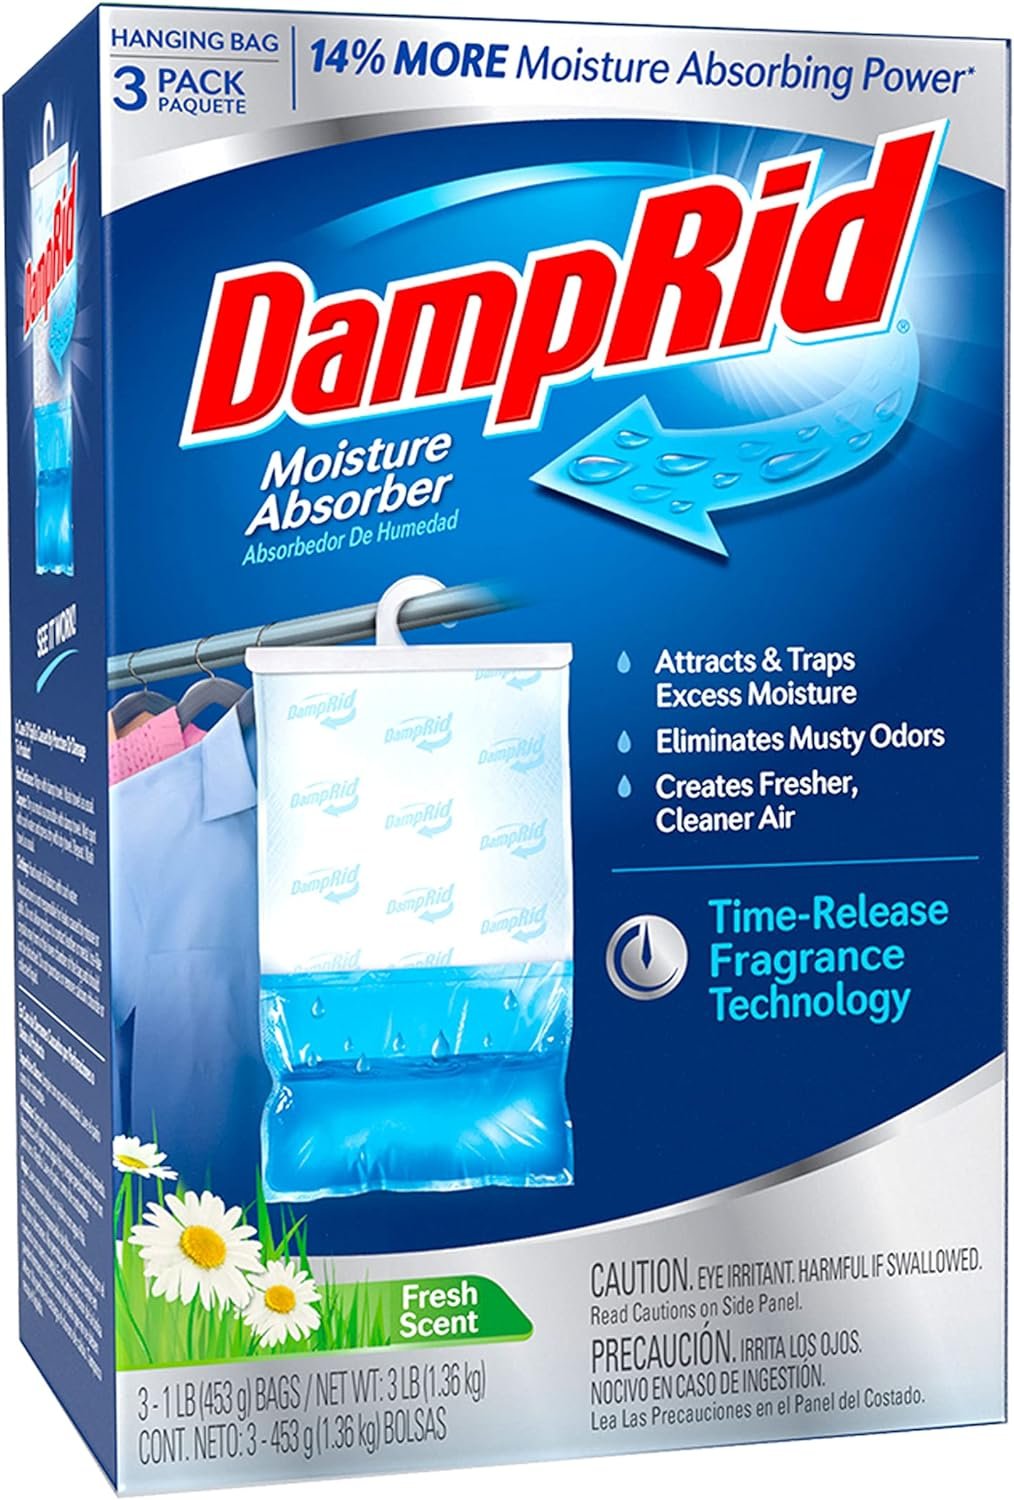 DampRid Fresh Scent Hanging Moisture Absorber Review